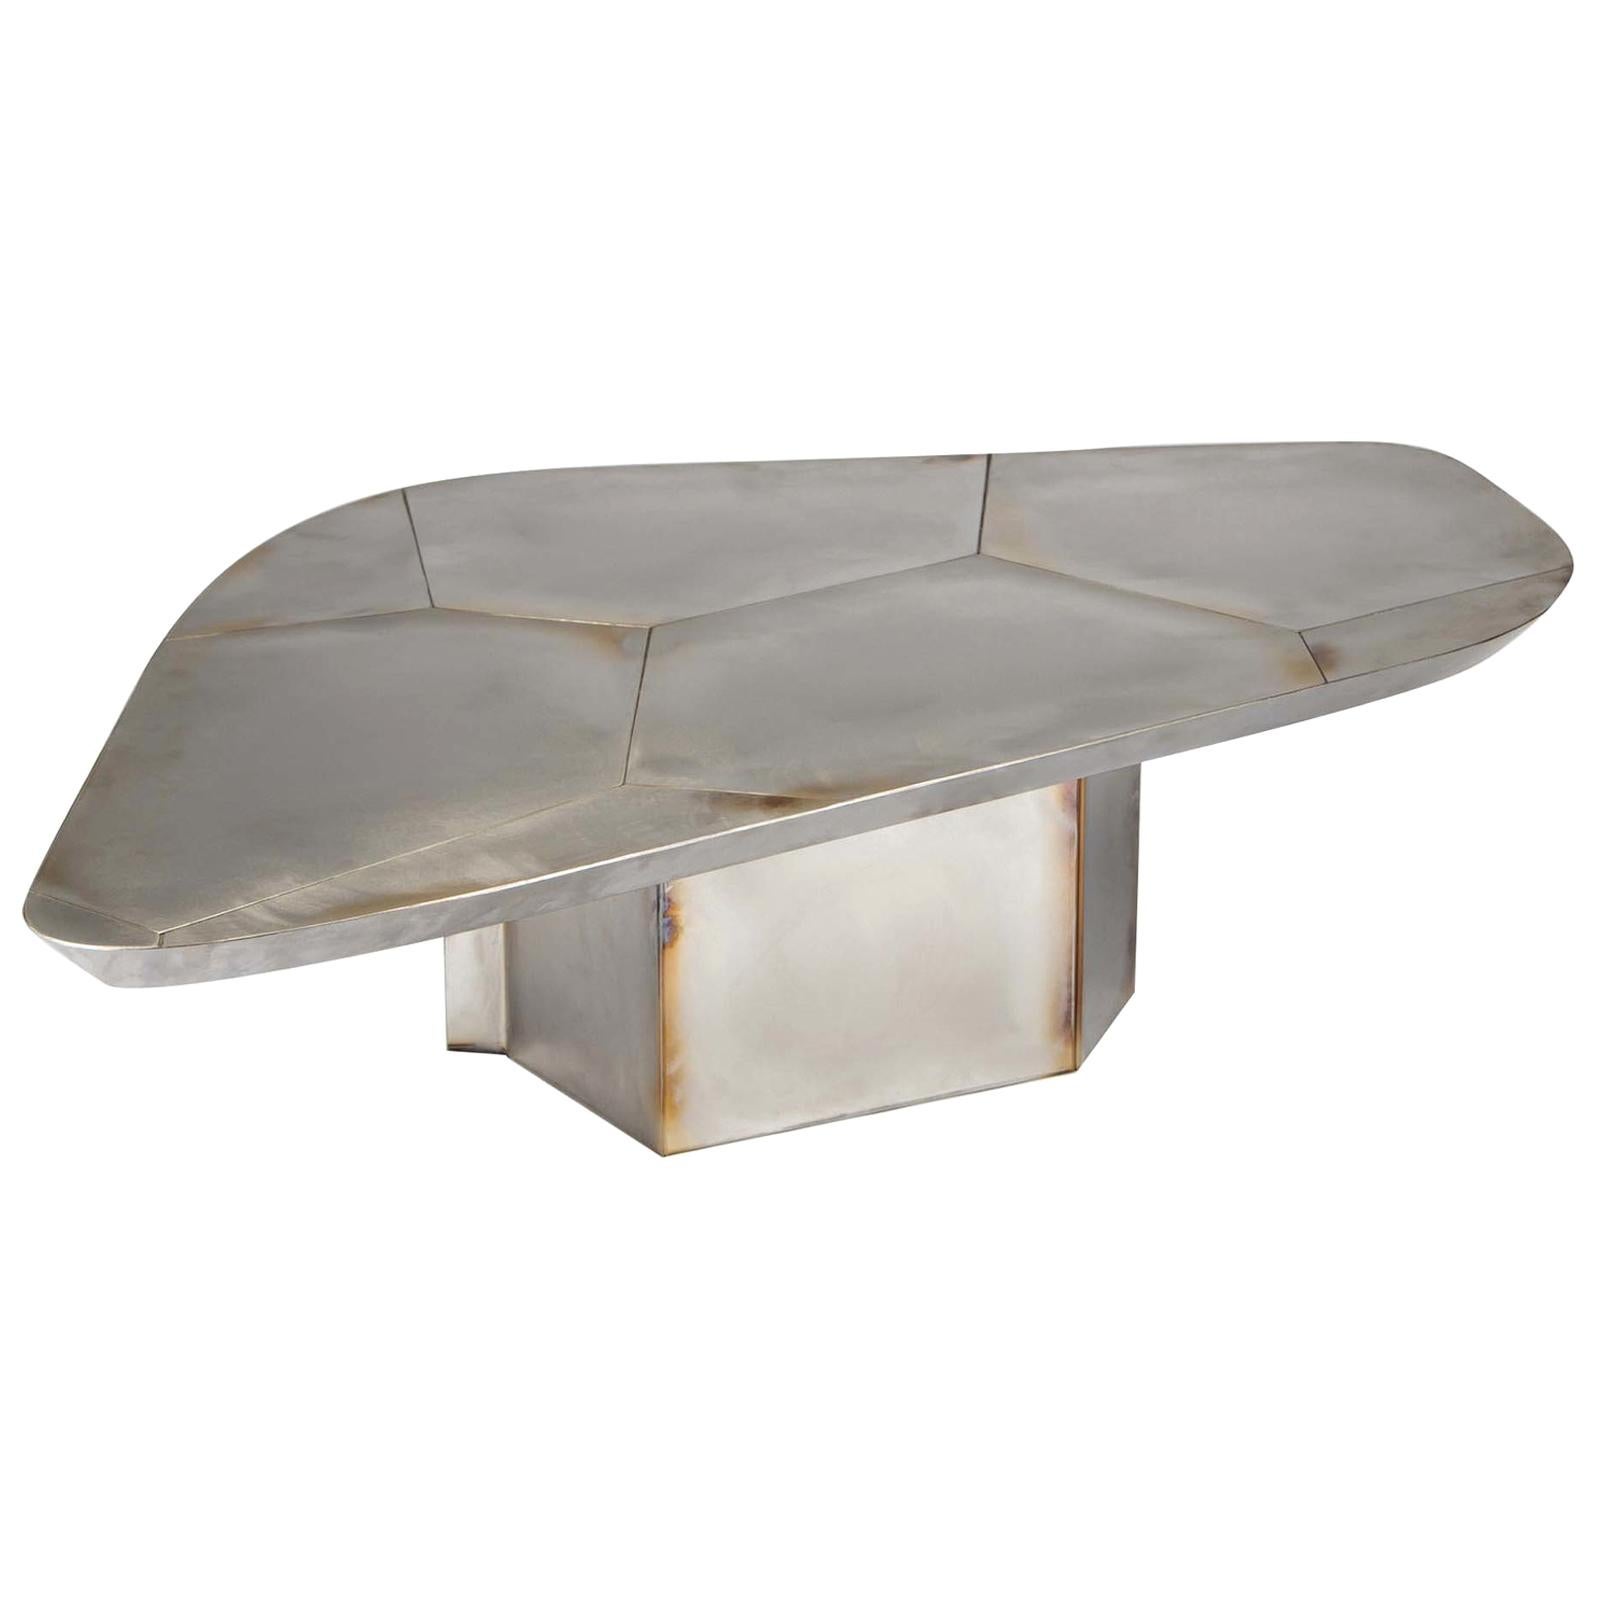 Thinking Klein Steel Coffee Table by Frisoli For Sale